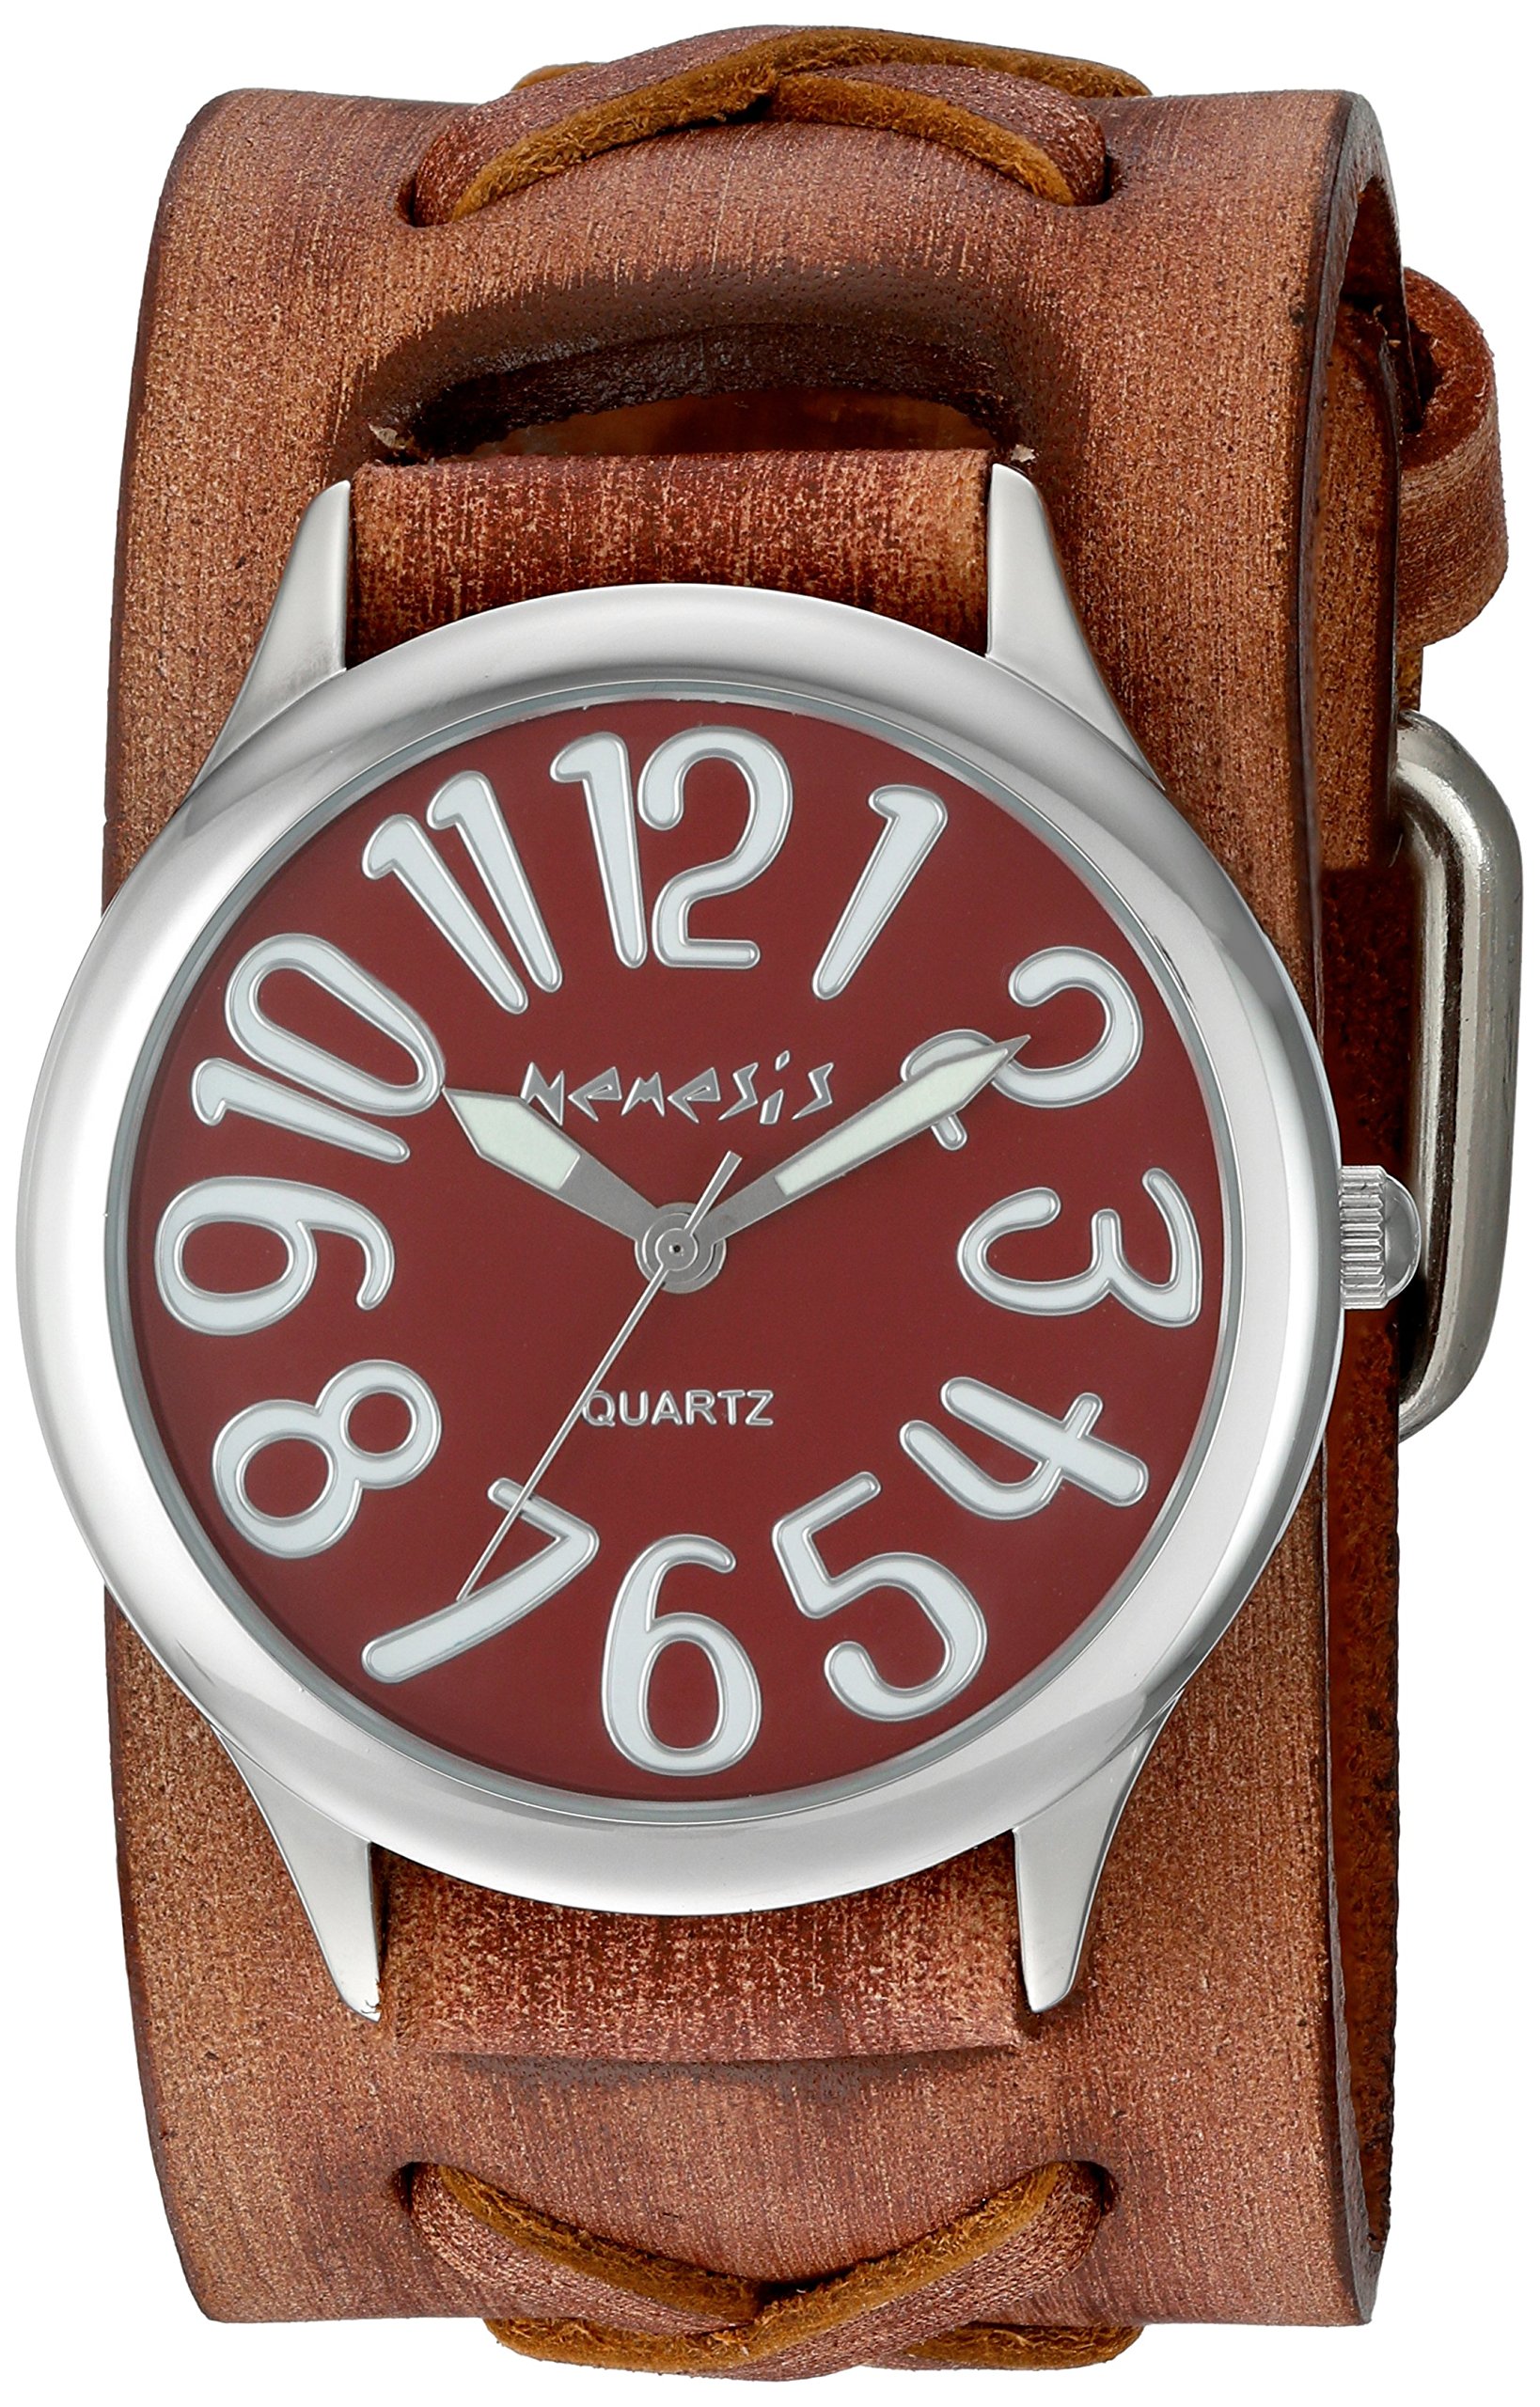 Nemesis Women's 'Always Summer Series' Quartz Stainless Steel and Leather Watch, Color:Brown (Model: BSFX108R)